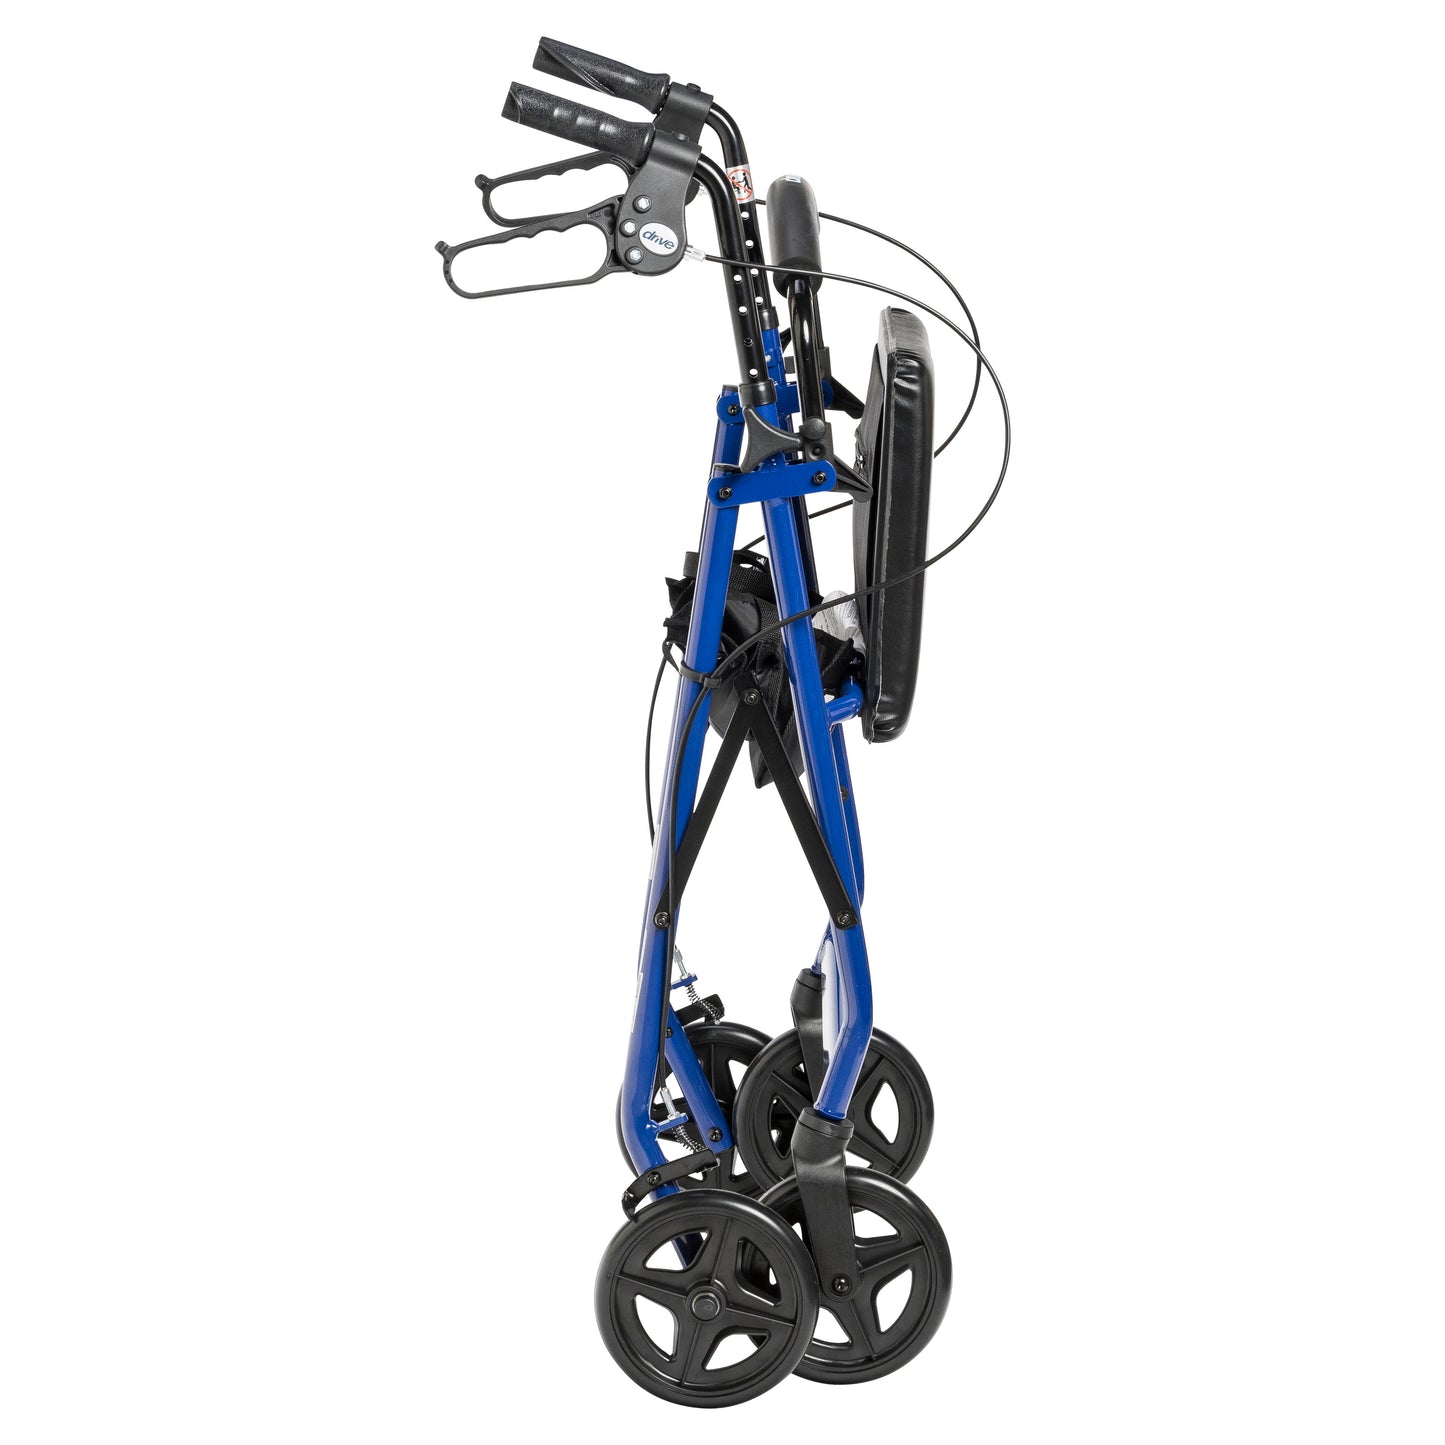 Aluminum Rollator Rolling Walker with Fold Up and Removable Back Support and Padded Seat